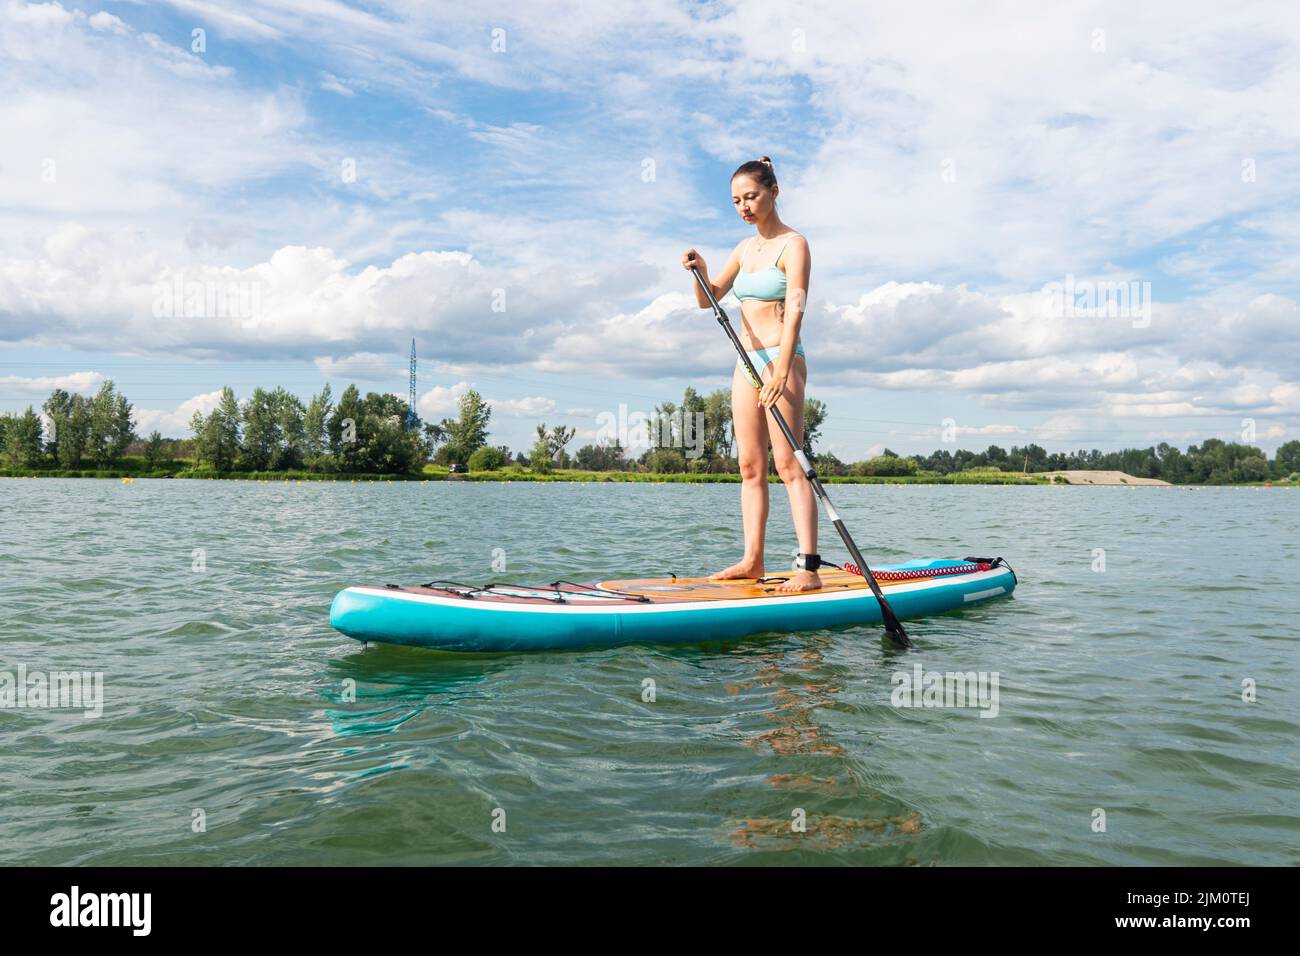 Caucasian woman standing on sup board with one oar in hands at sky on crystal blue lake wearing summer blue swimsuit dress. Active lifestyle. Stock Photo